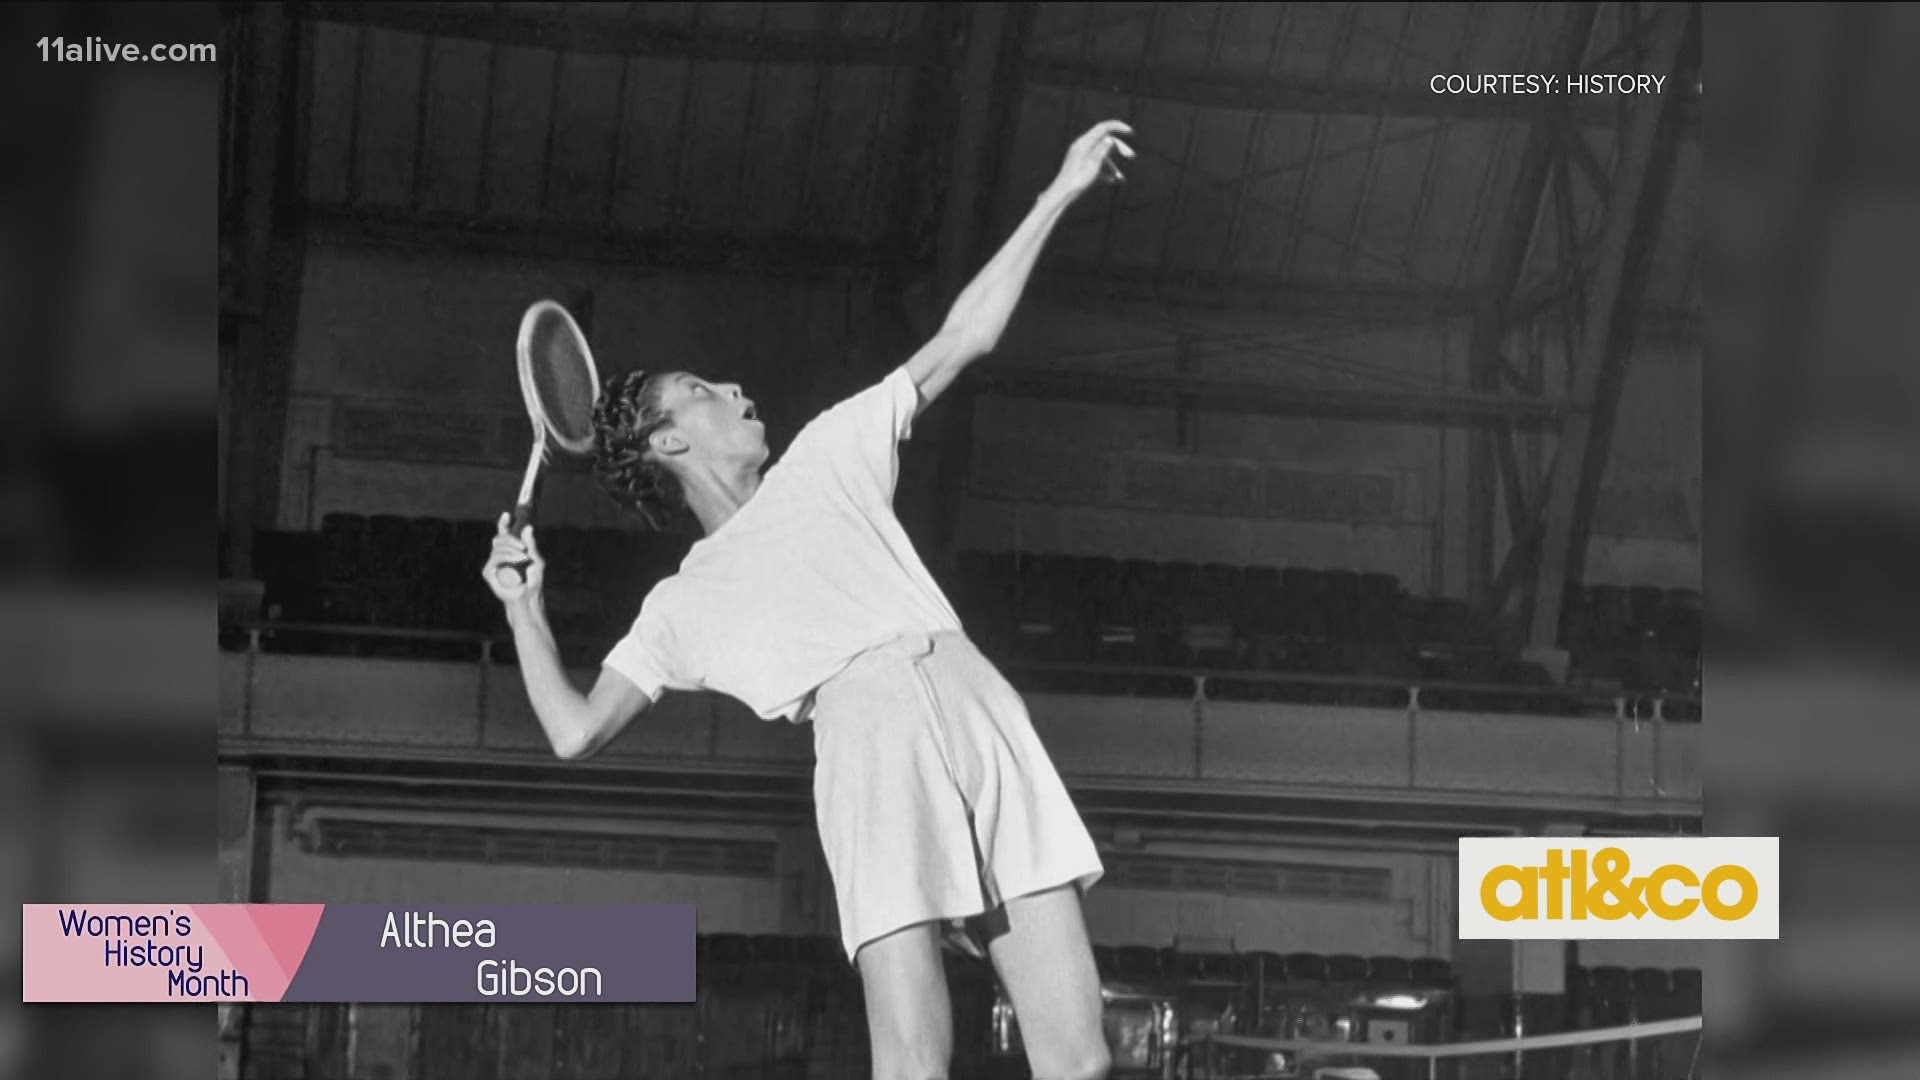 Professional tennis player Althea Gibson was the first African American to win a Grand Slam title, eventually winning 11 and getting inducted into the Hall of Fame.